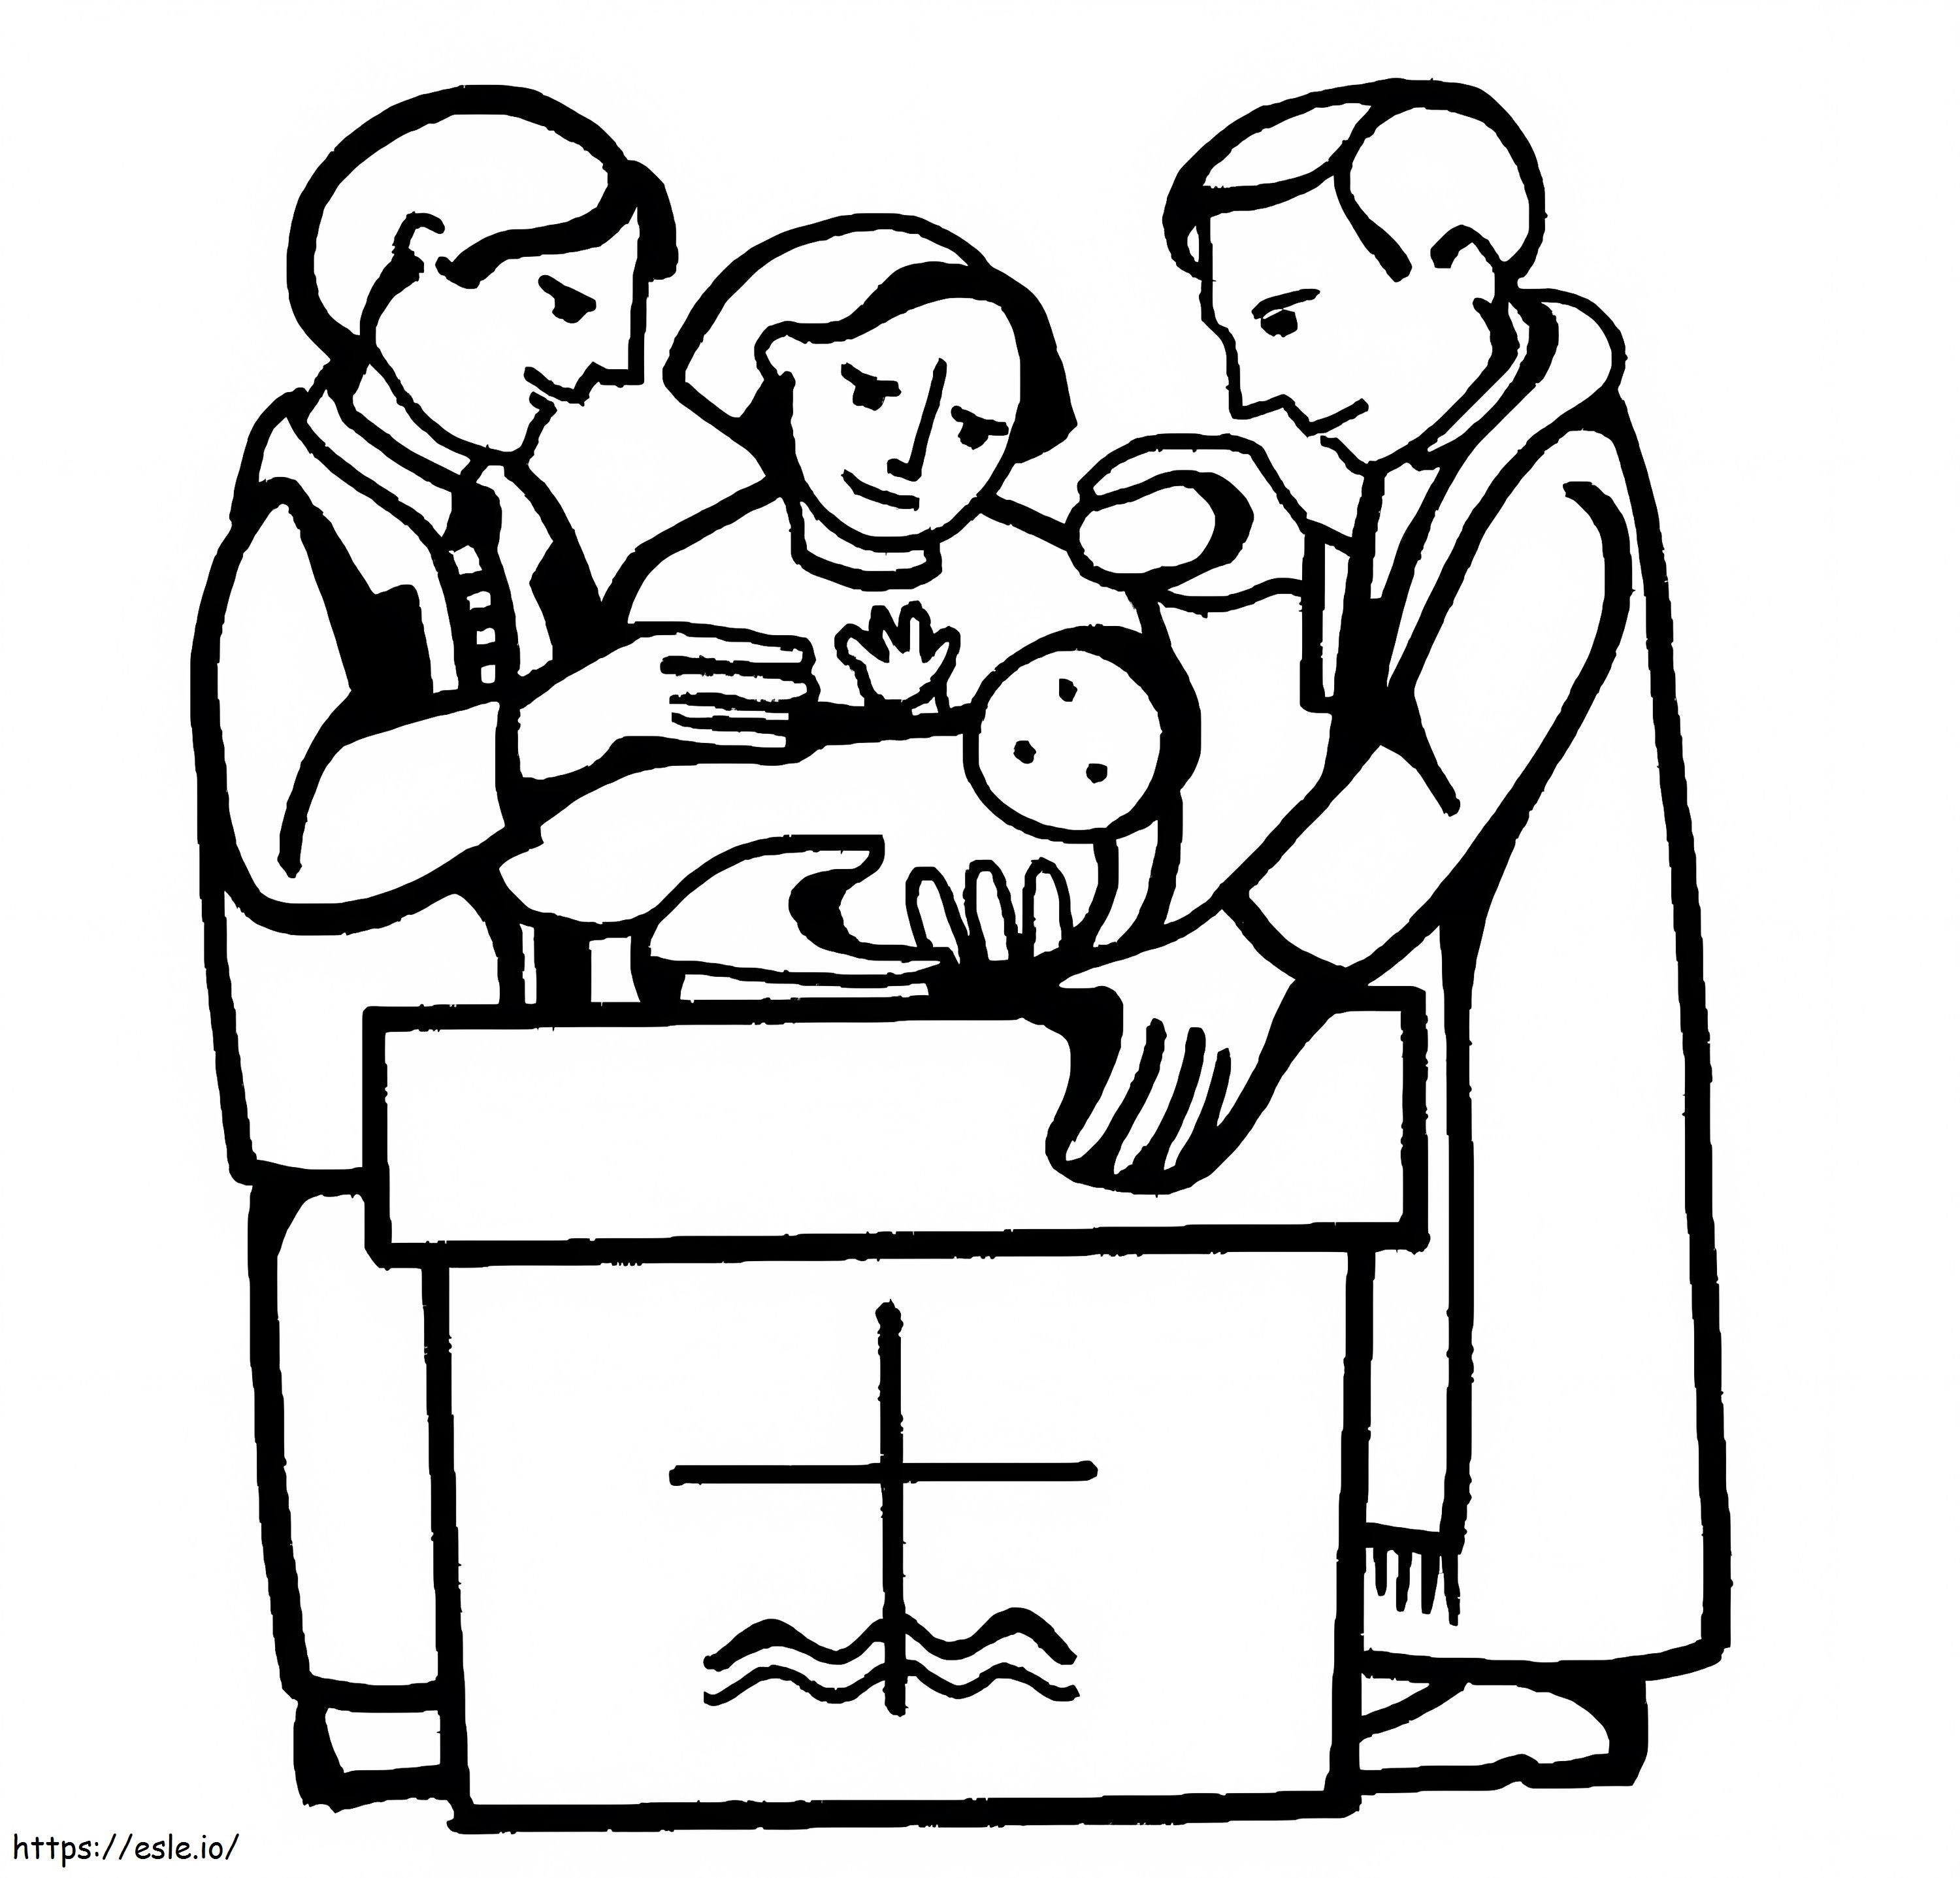 Baptism 2 coloring page